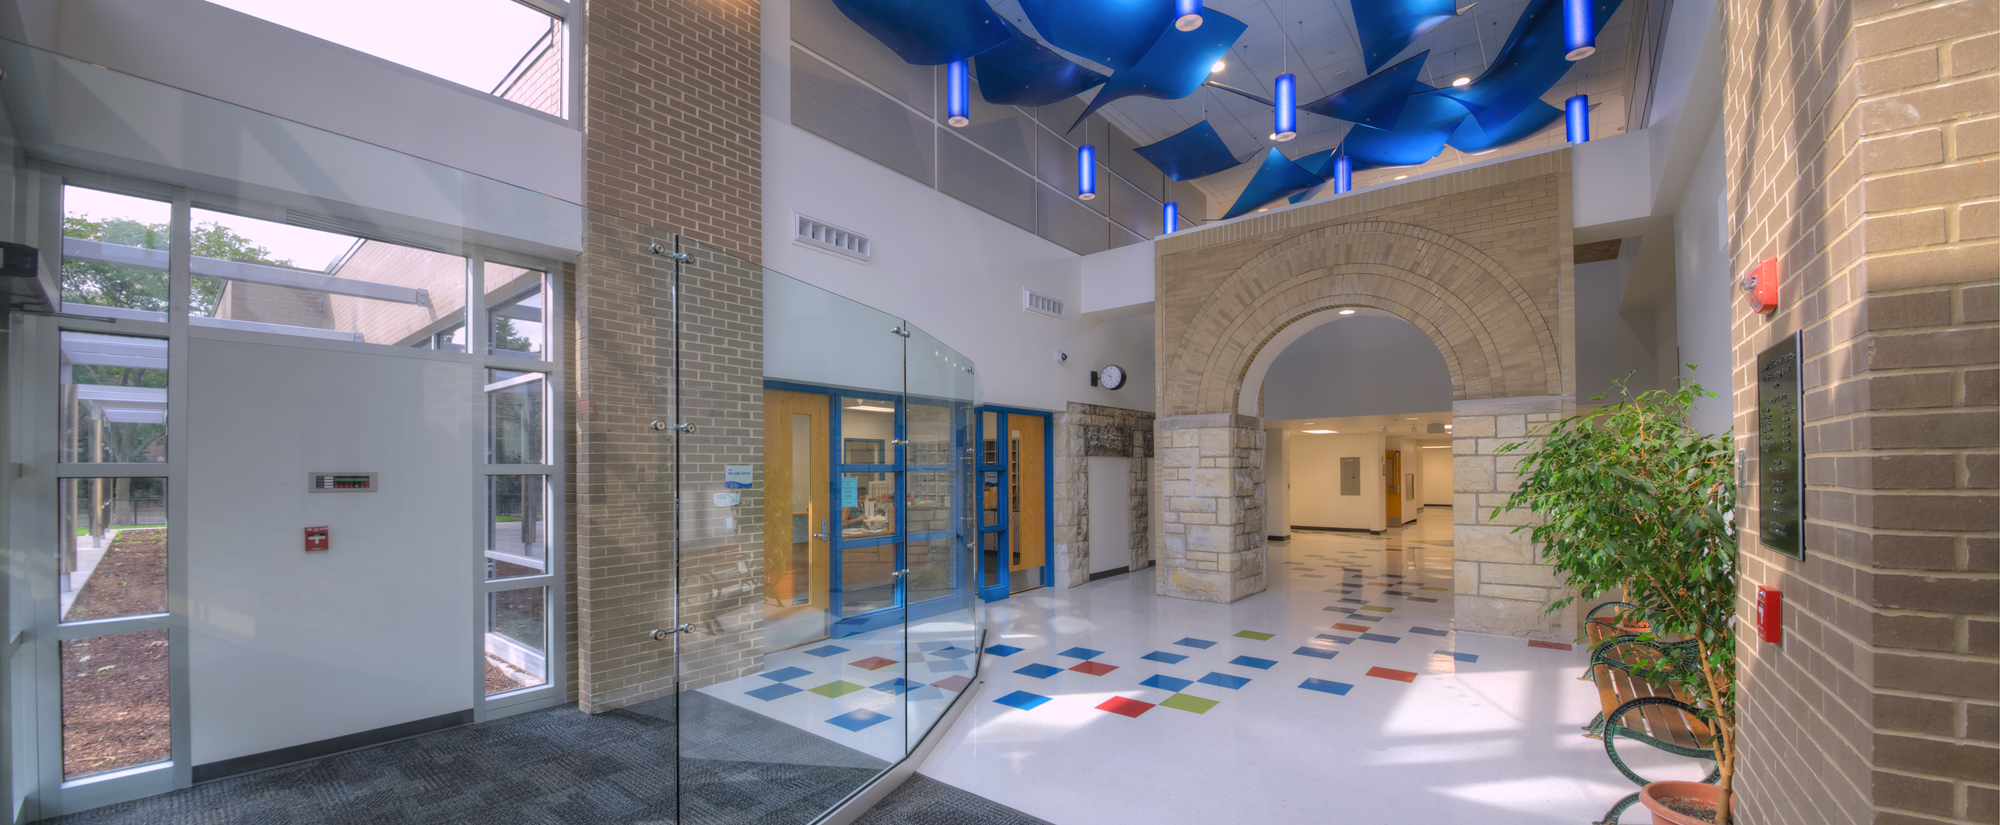 Lincoln Elementary School Addition & Remodeling